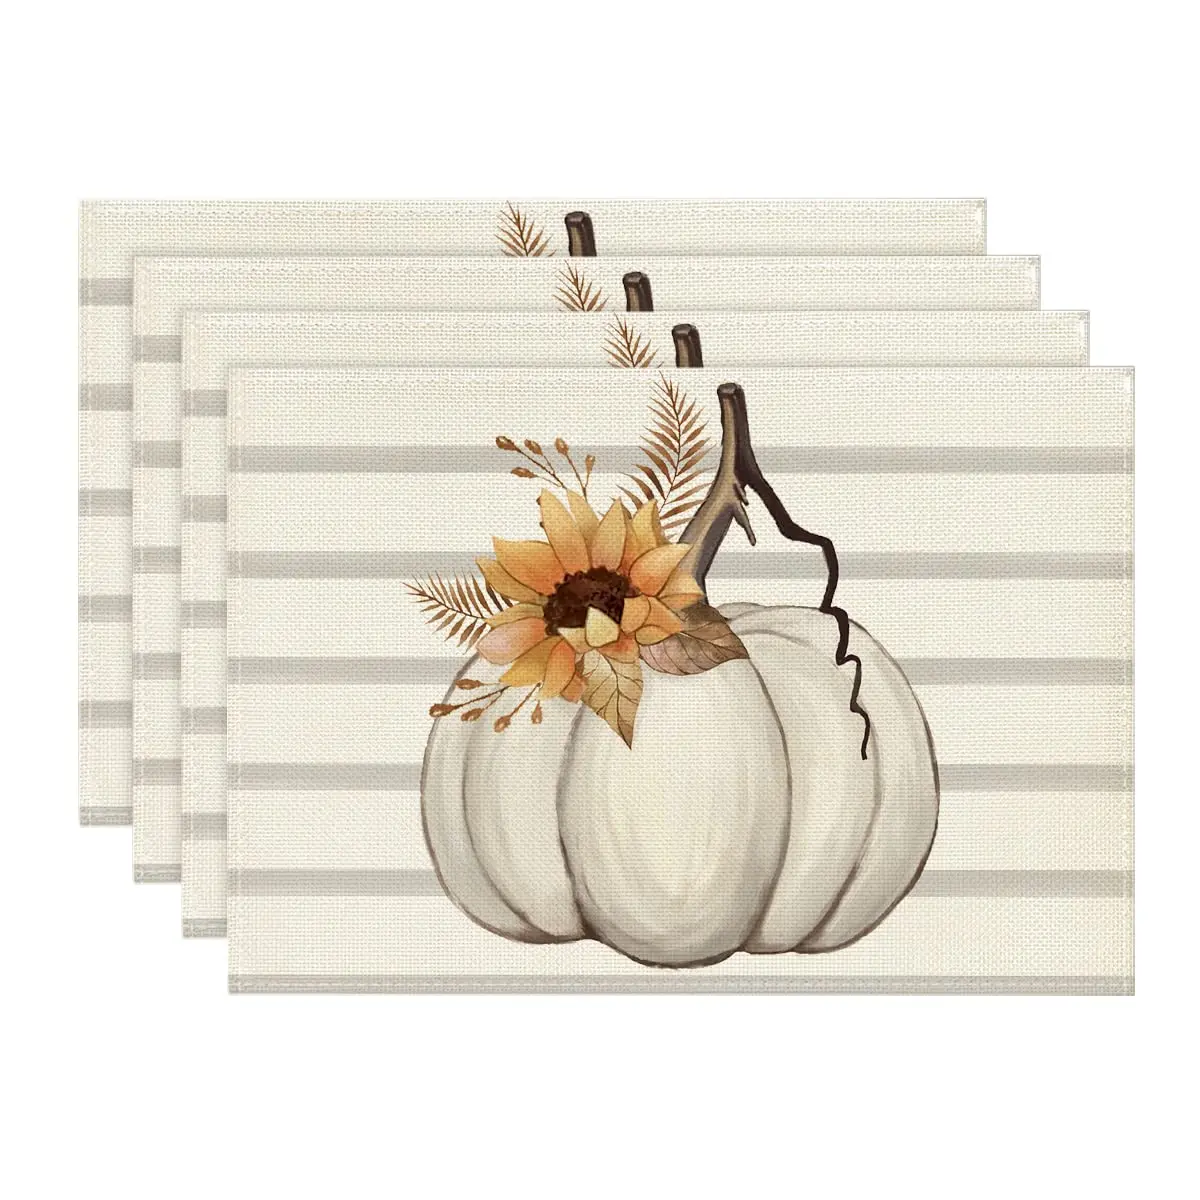 

Stripes Pumpkin Sunflower Leaves Fall Placemats Set of 4, 12x18 Inch, Autumn Table Mats for Party, Kitchen, Dining Decor